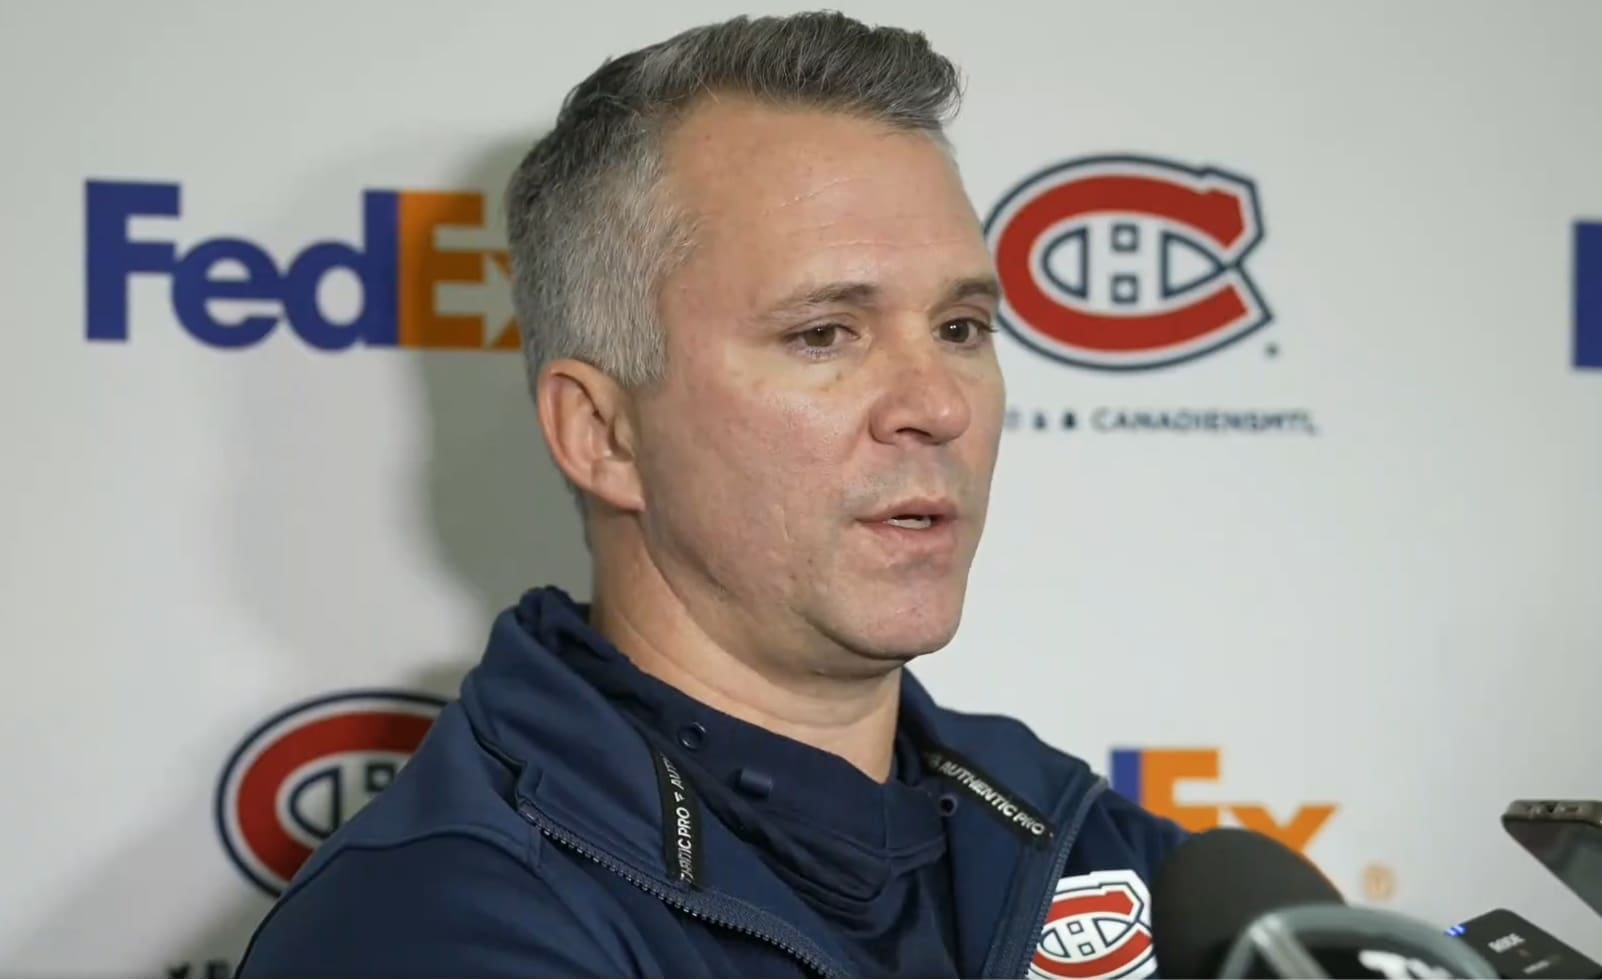 How will St. Louis's absence affect the Montreal Canadiens?